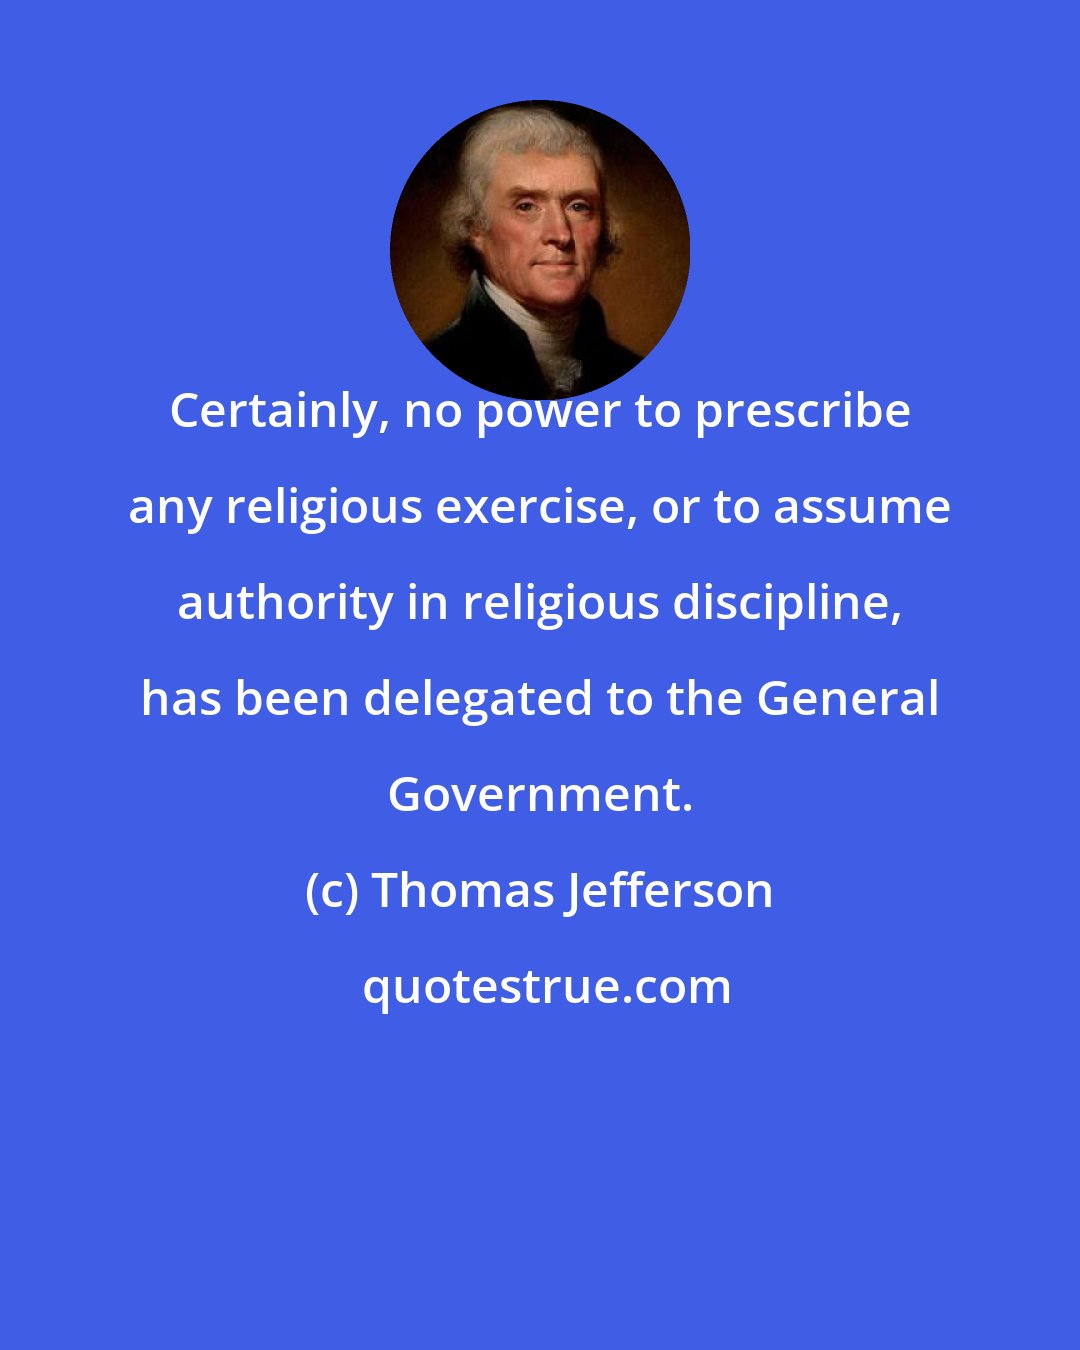 Thomas Jefferson: Certainly, no power to prescribe any religious exercise, or to assume authority in religious discipline, has been delegated to the General Government.